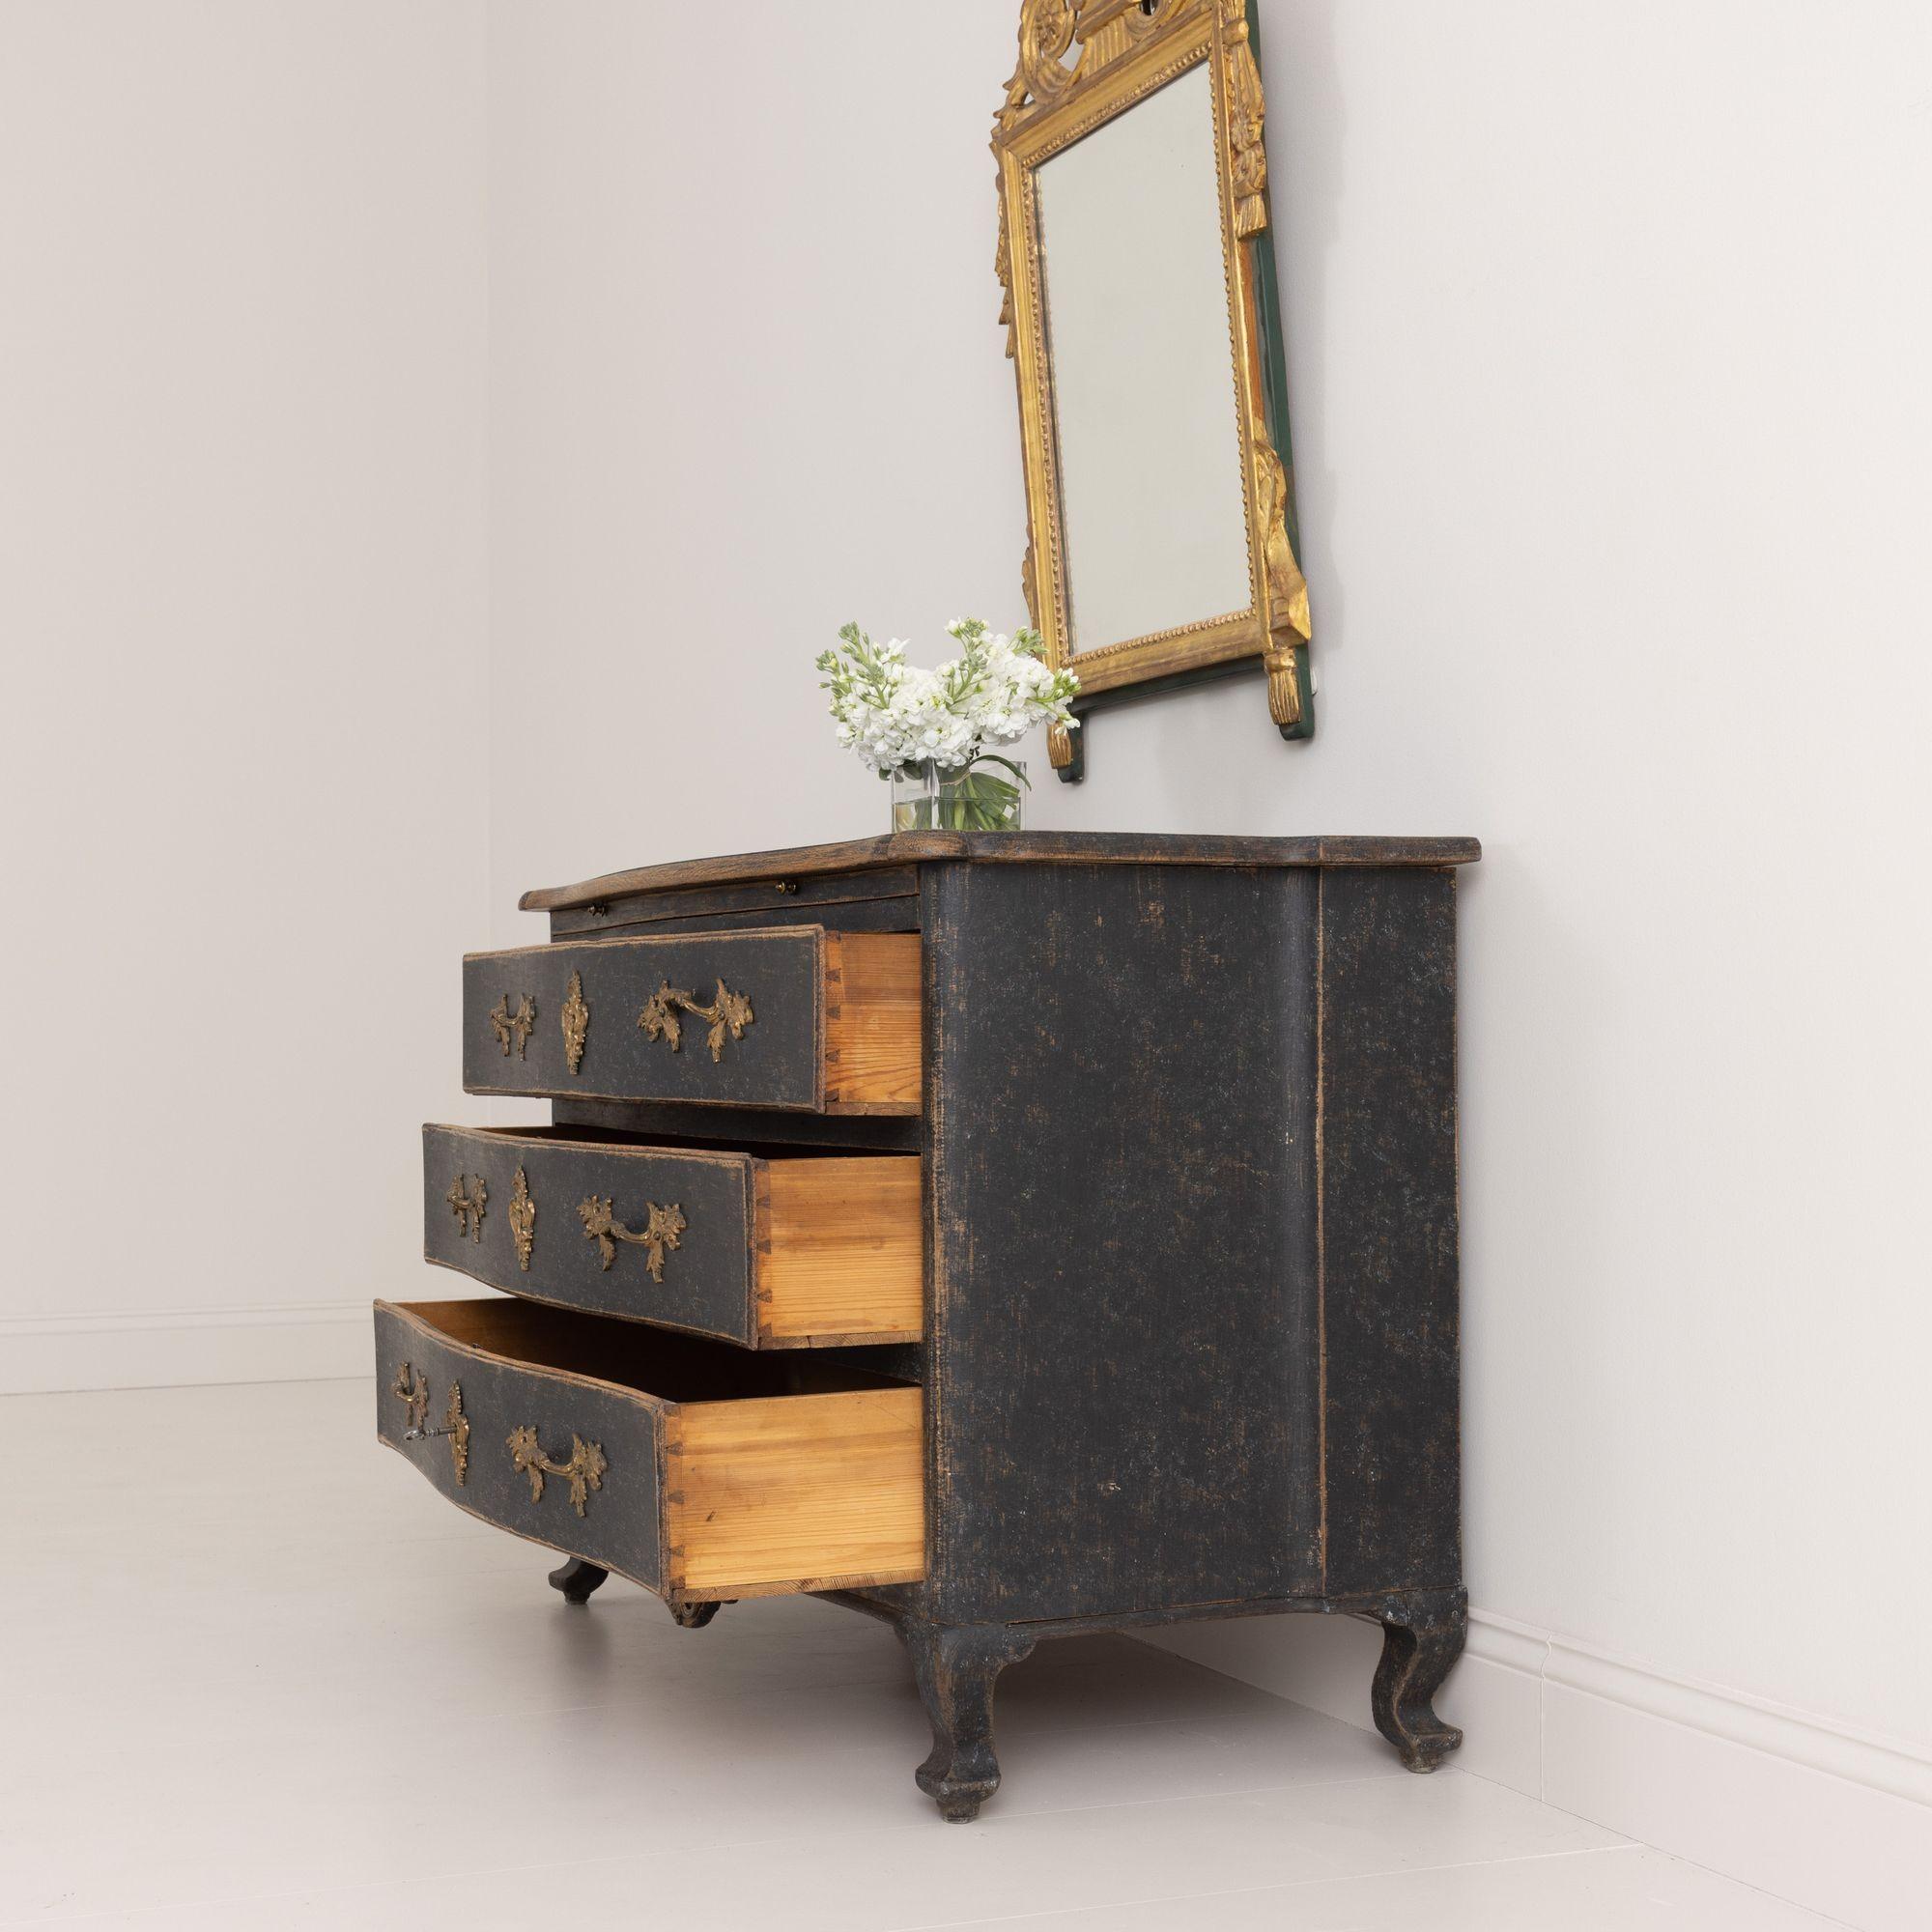 18th C. Swedish Rococo Period Black Painted Commode with Original Brass Hardware For Sale 4